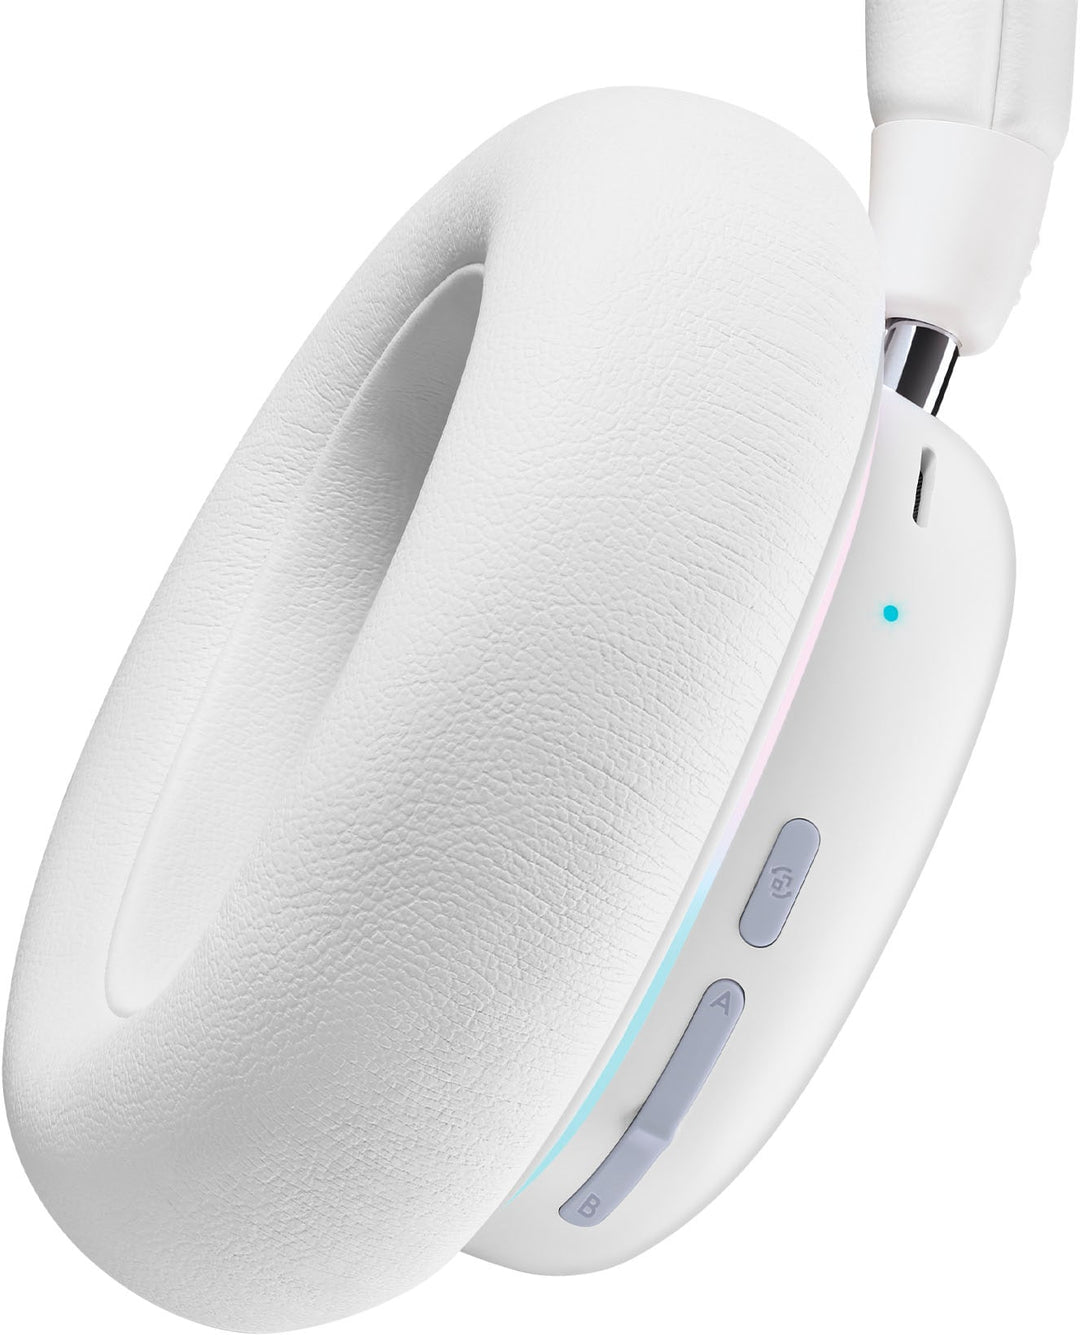 Logitech - G735 Aurora Collection Wireless Gaming Headset for PC/Mac and Mobile Devices with RGB Lighting - White Mist_6